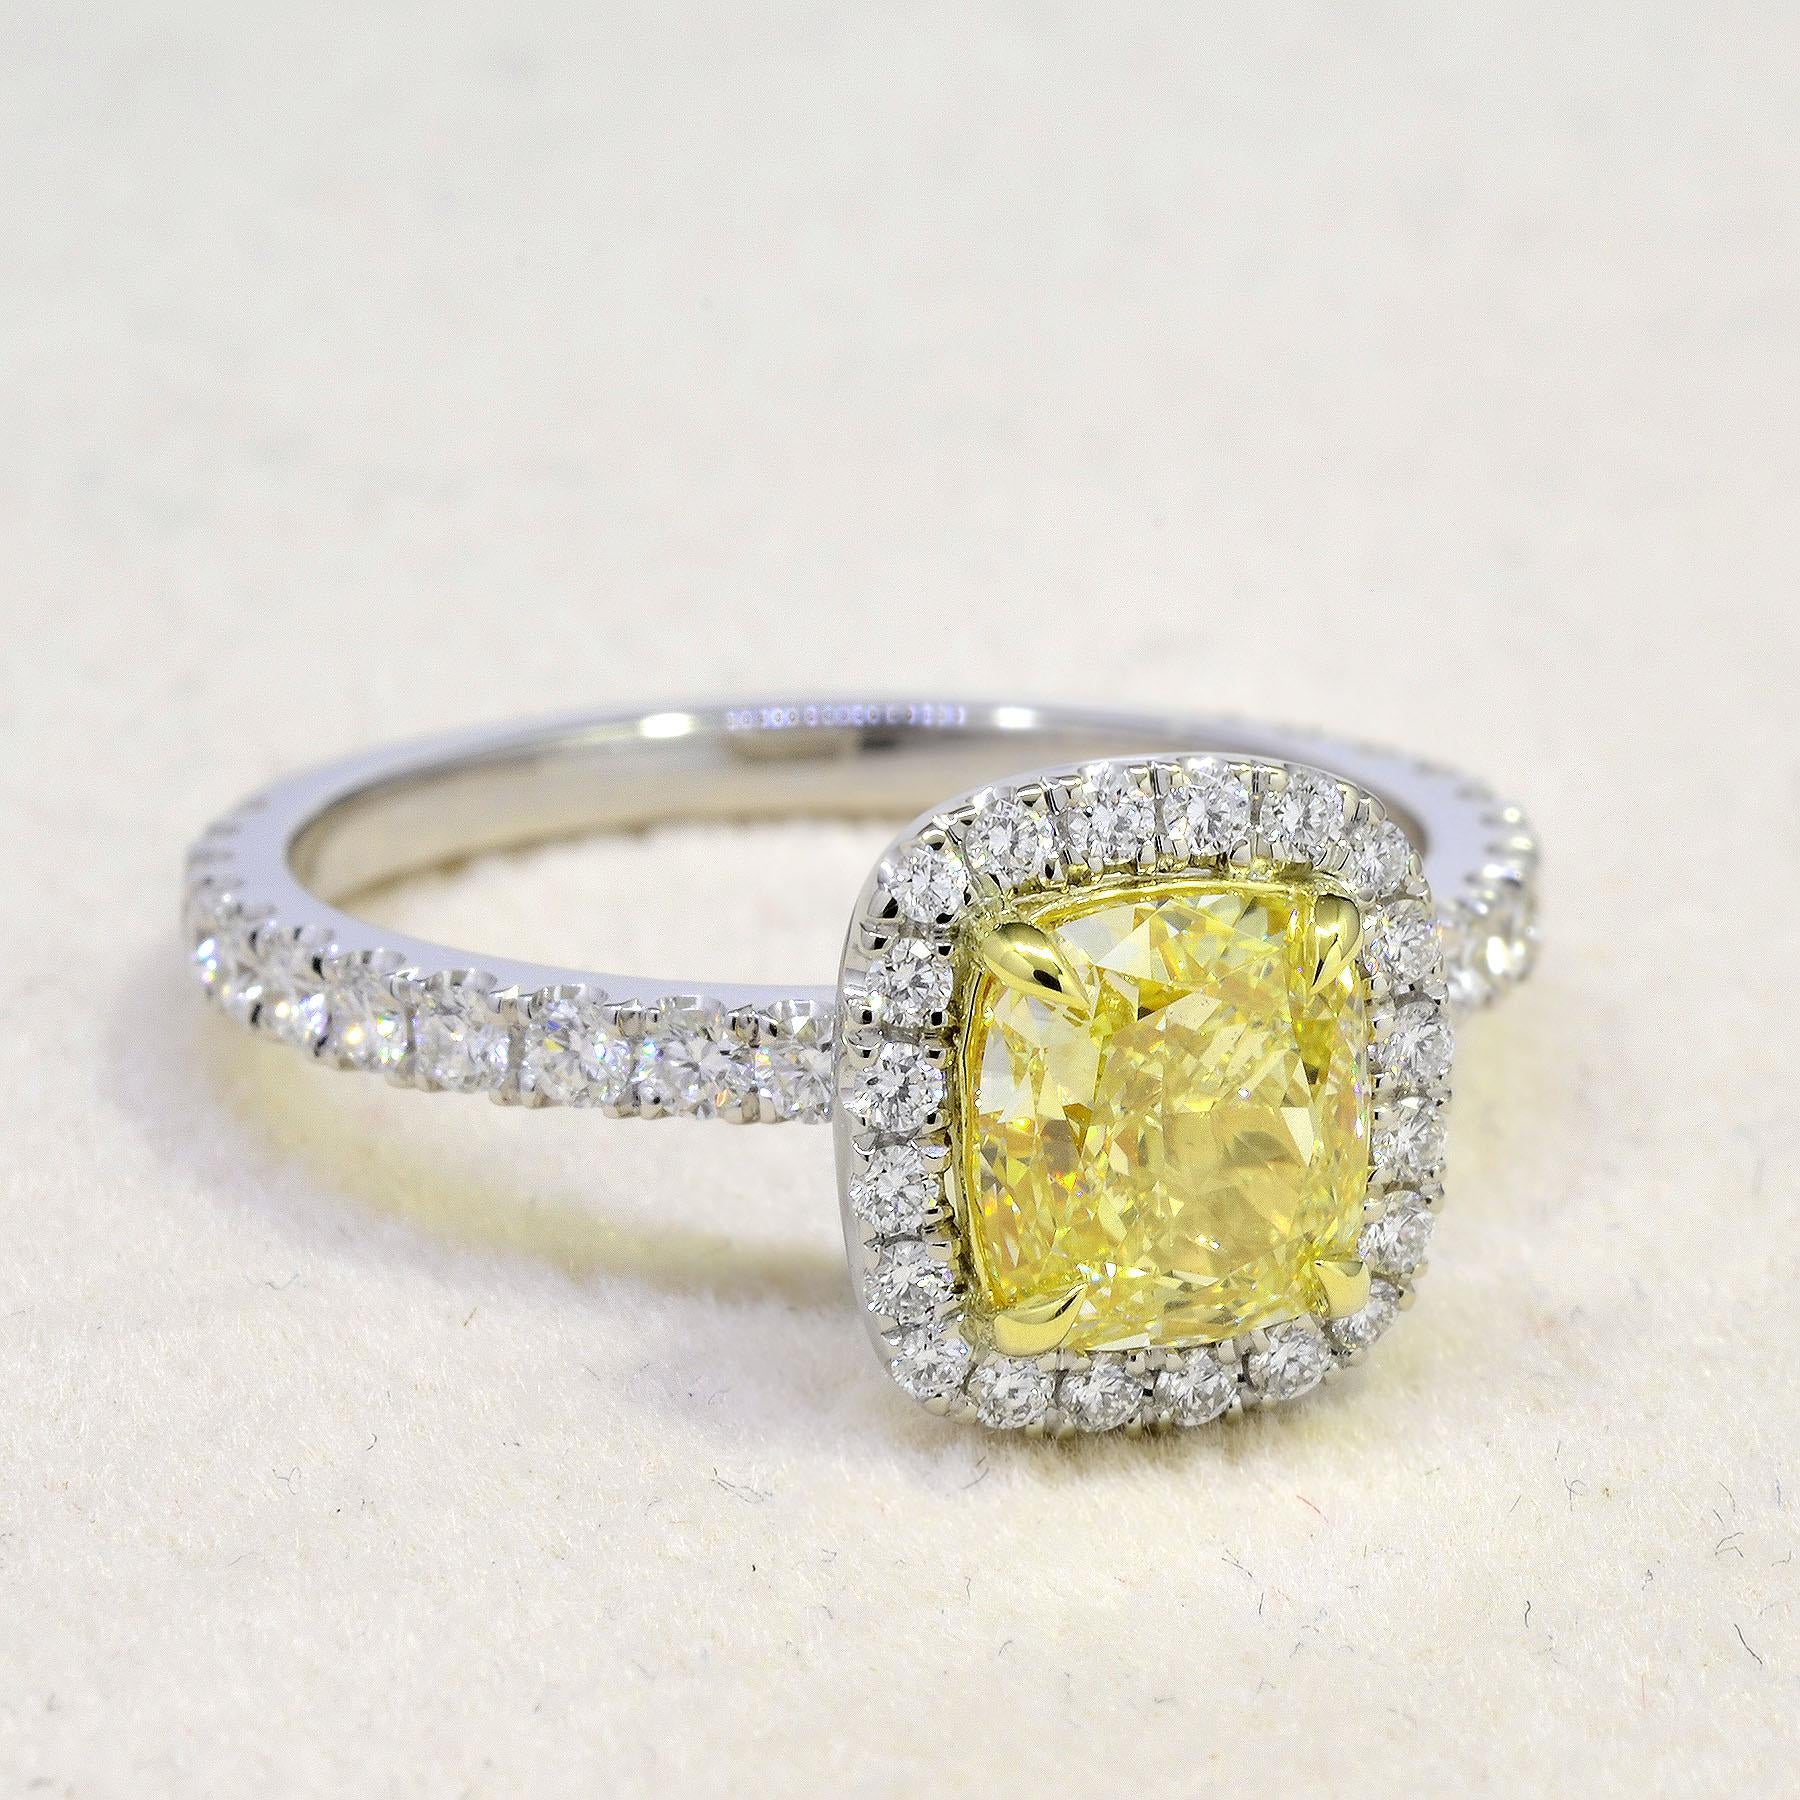 This fabulous Canary Fancy Yellow Halo Cushion Cut Engagement Ring has a 1.70 Ct. Cushion cut center diamond with Natural Fancy Yellow color and VS2 clarity. Surrounding the center stone and lining around the shank is 0.90 carat U-pave set Round cut